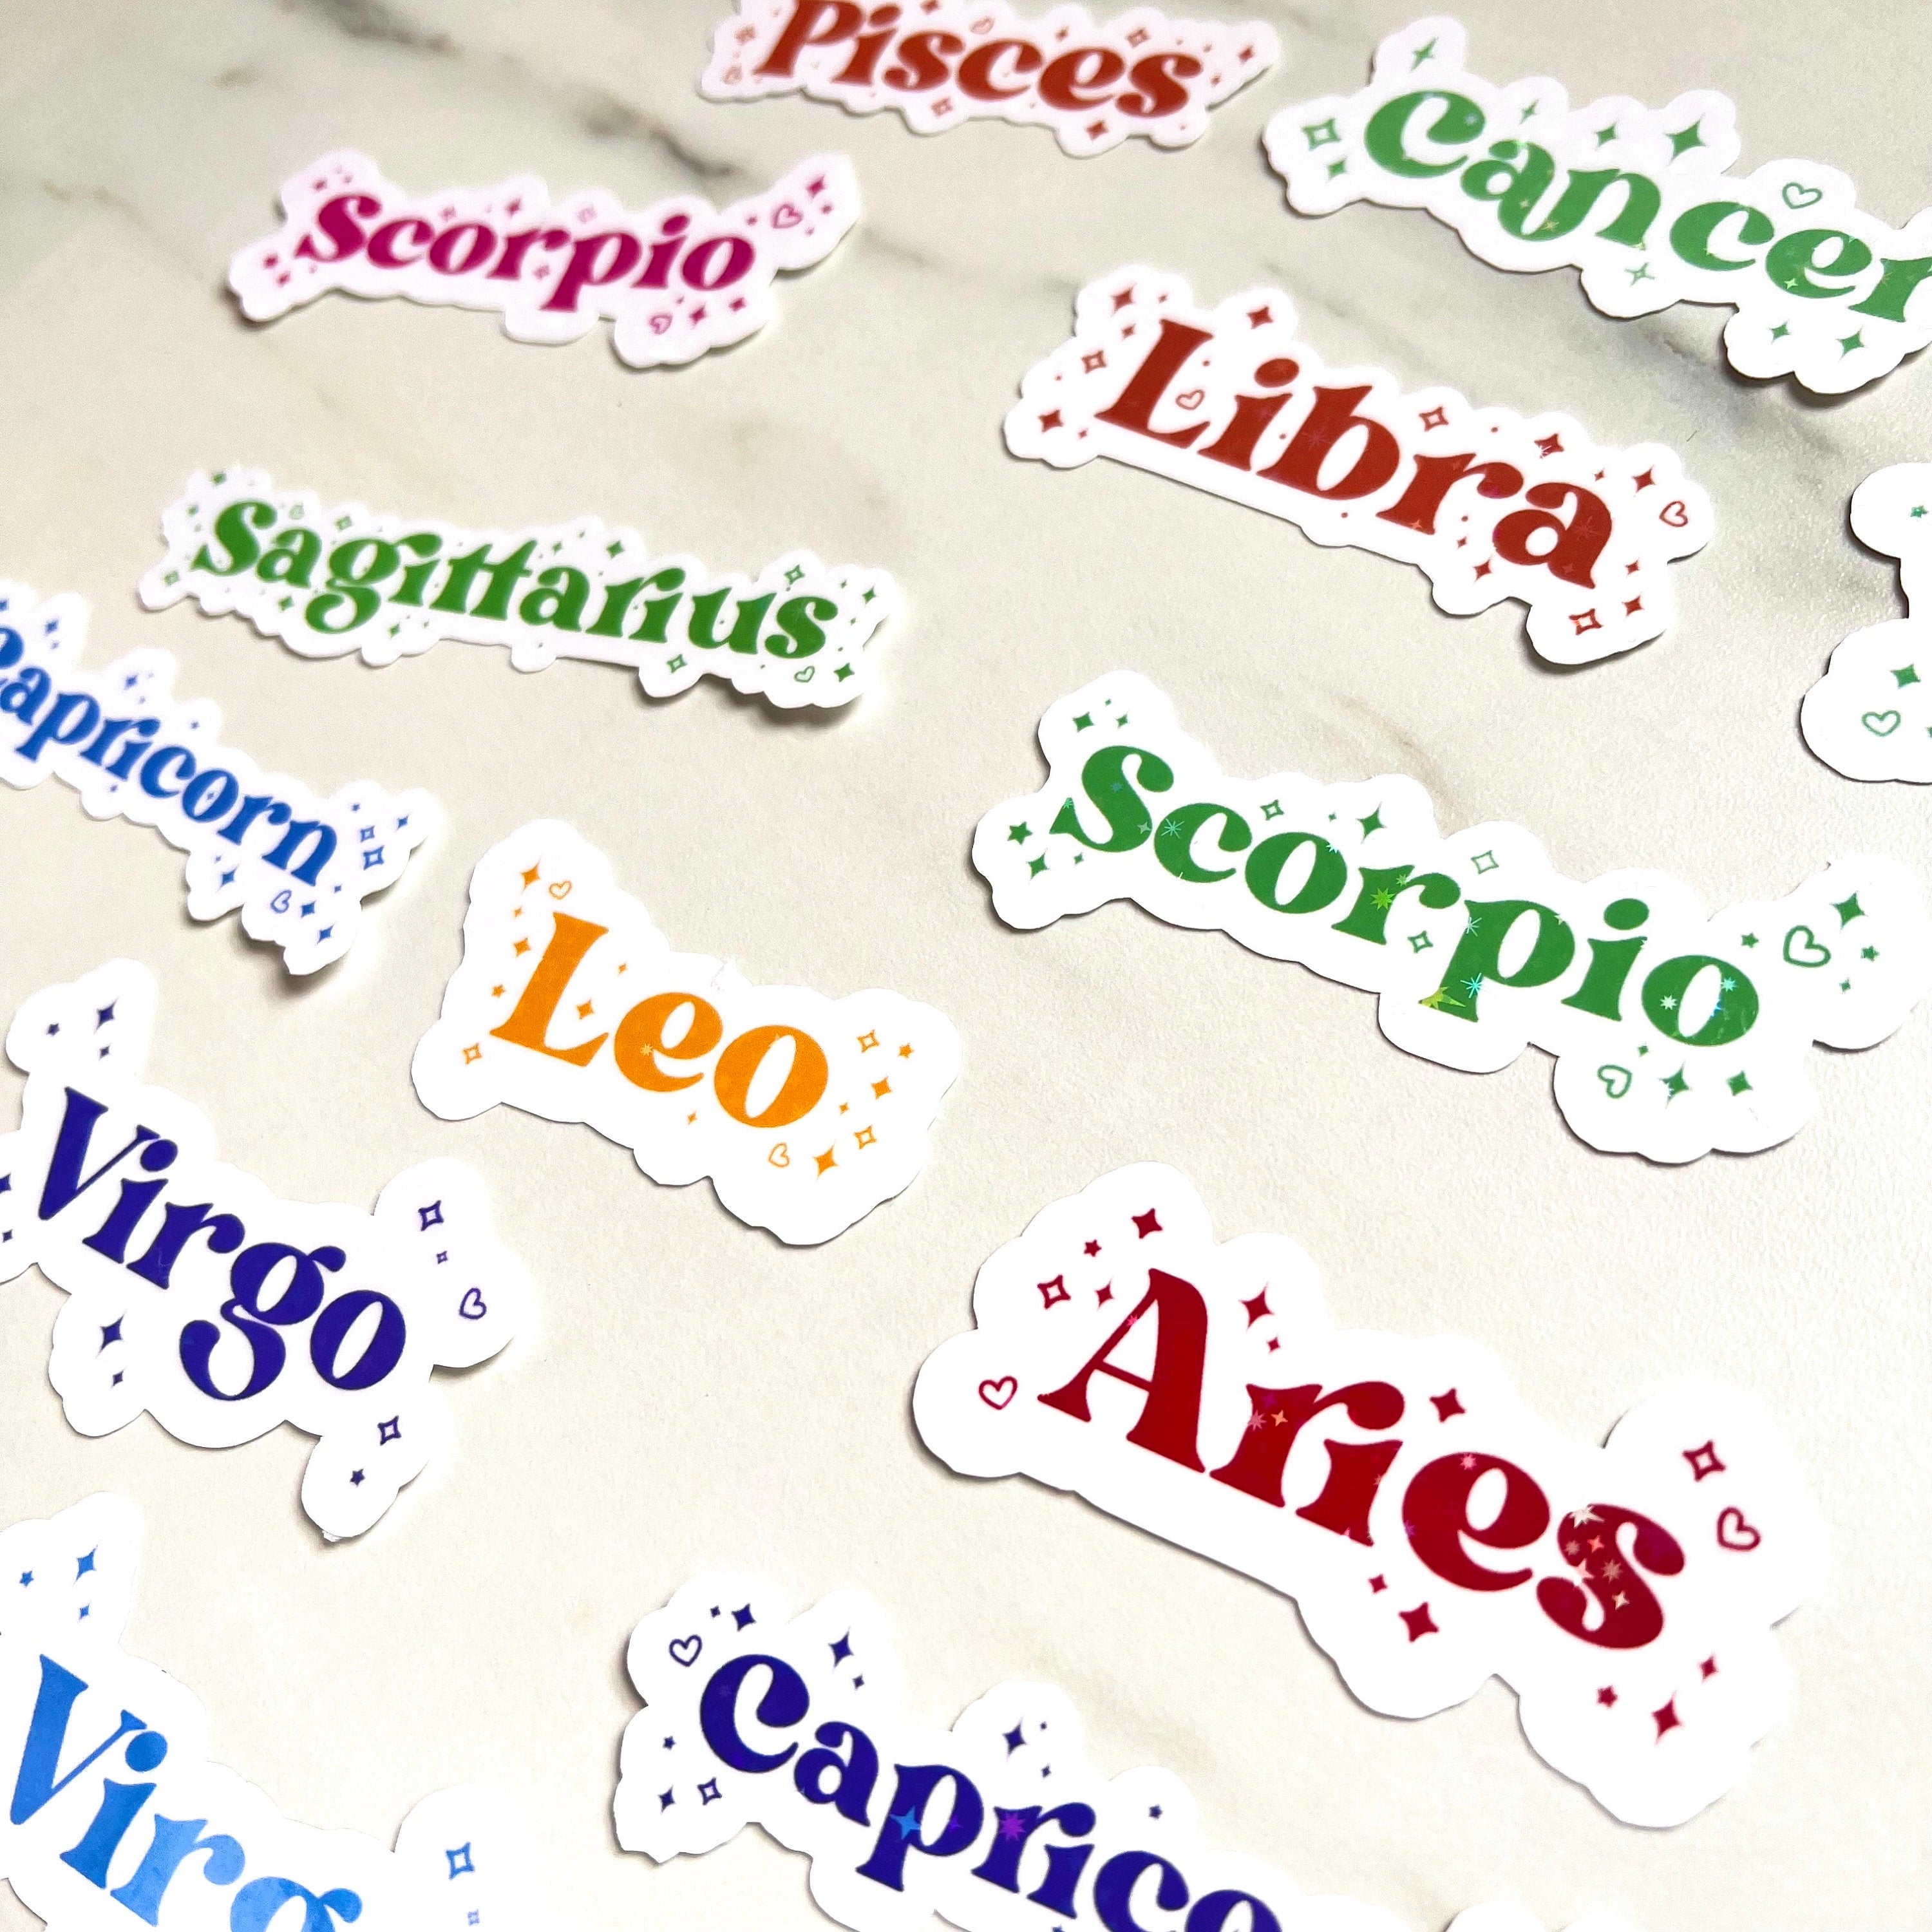 Zodiac Sticker Astrology, Holographic Star Sign, Vinyl, Witchy Tarot Horoscope, kindle stickers, laptop, die cut one piece sticker